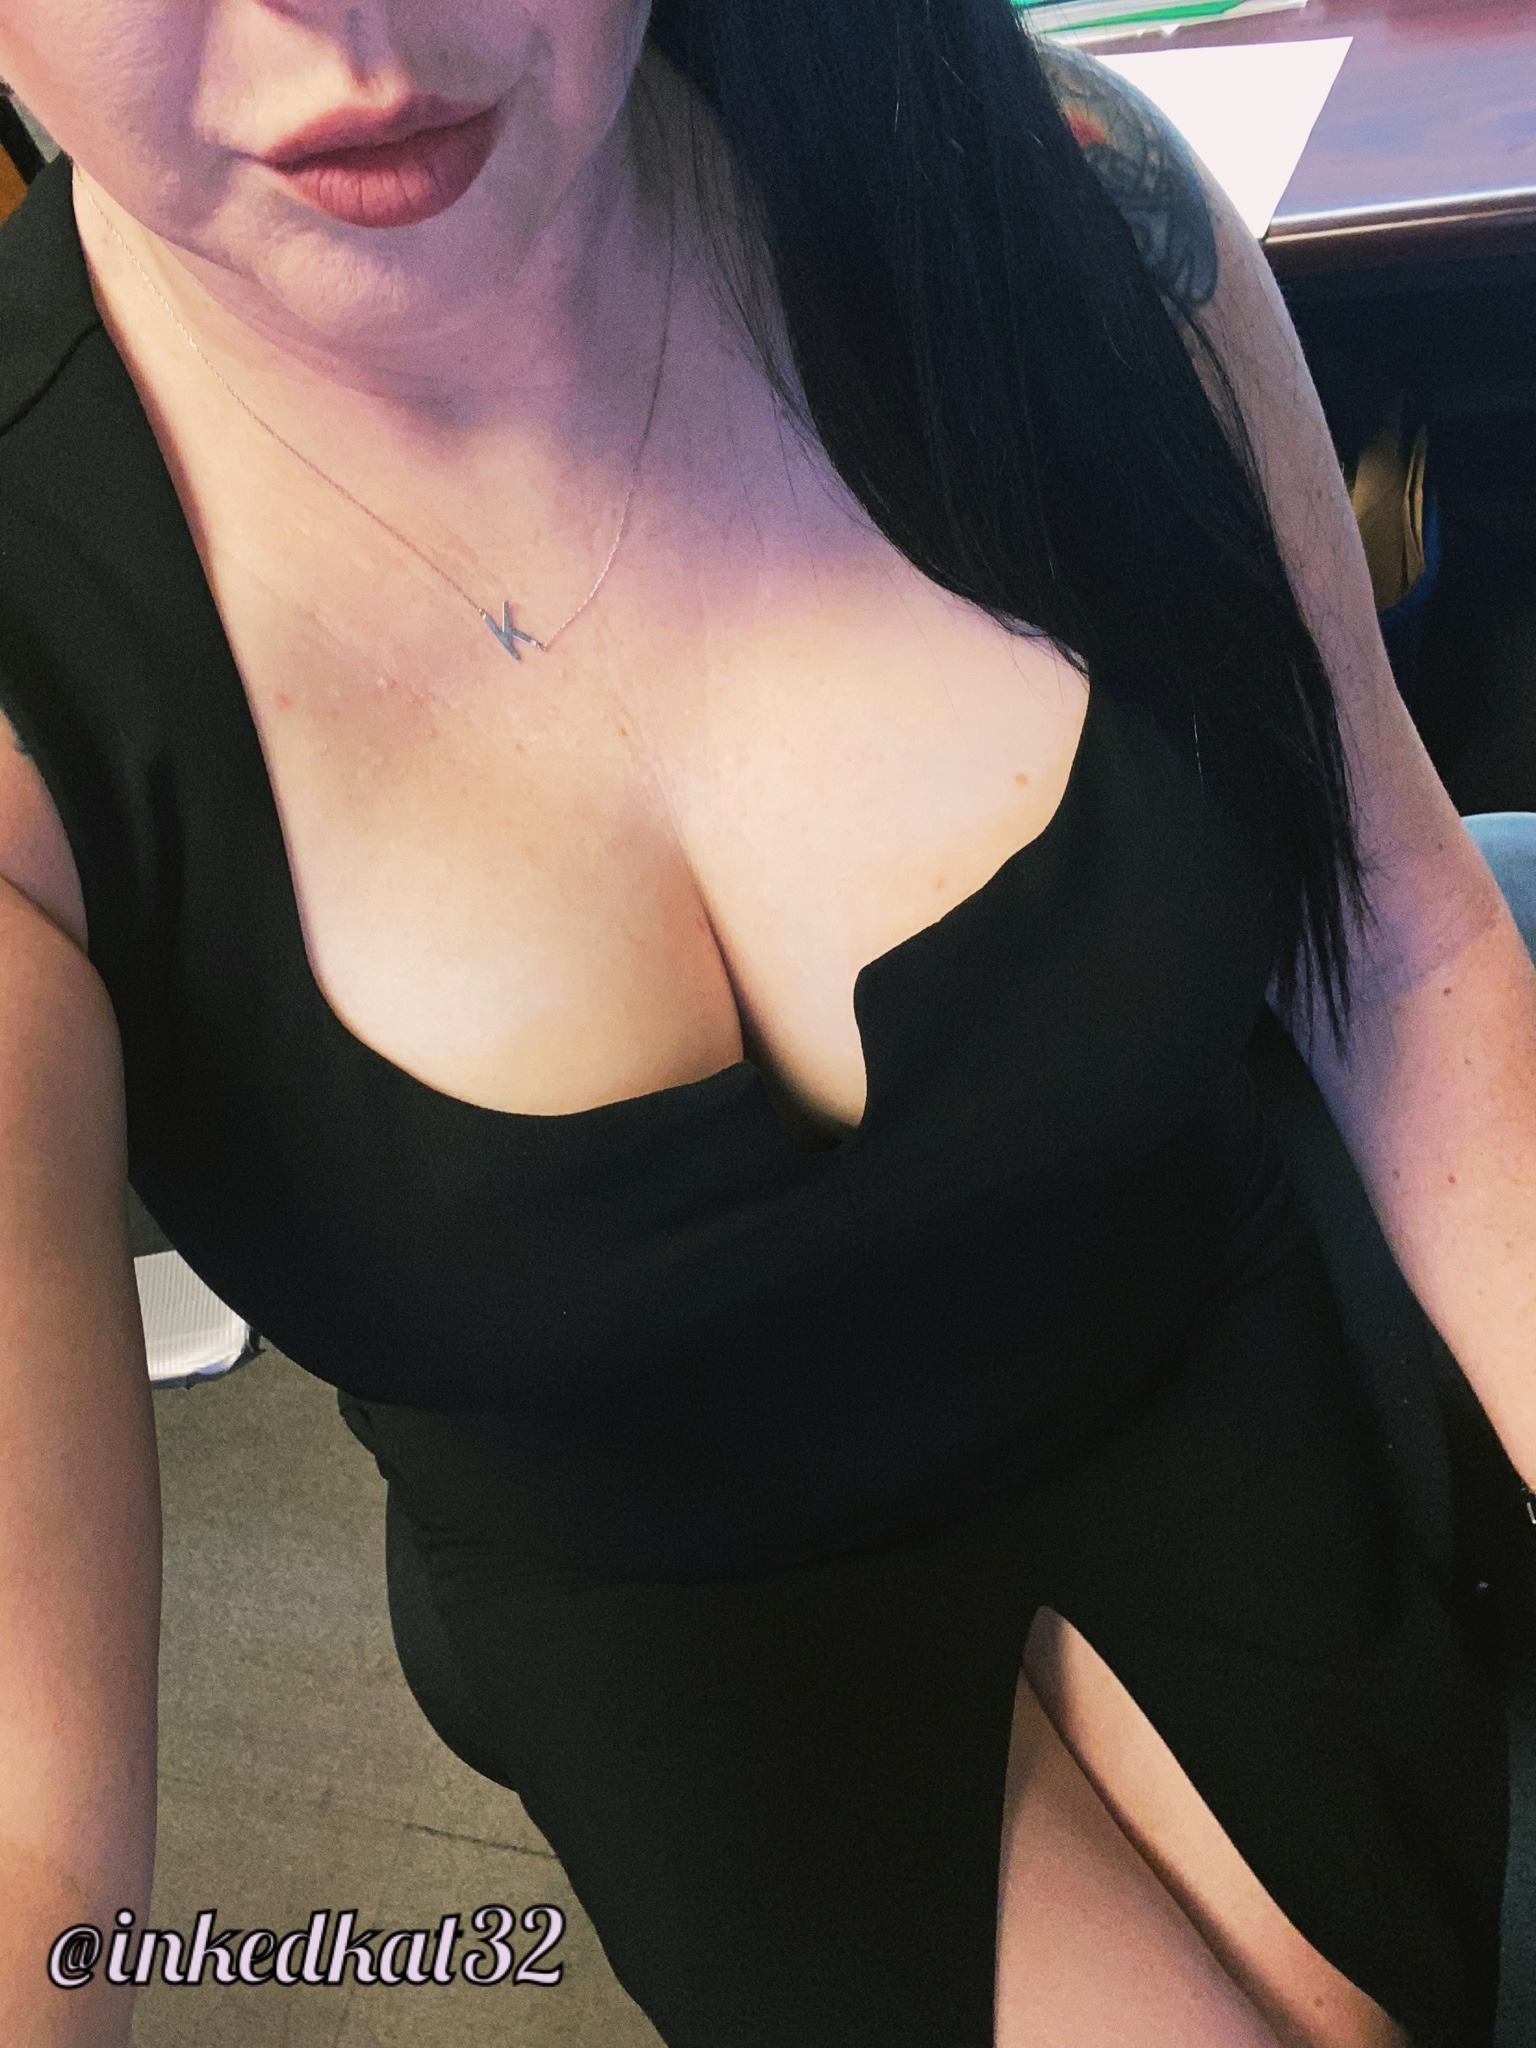 Porn inkedkat32:Maybe not the best dress for work? photos